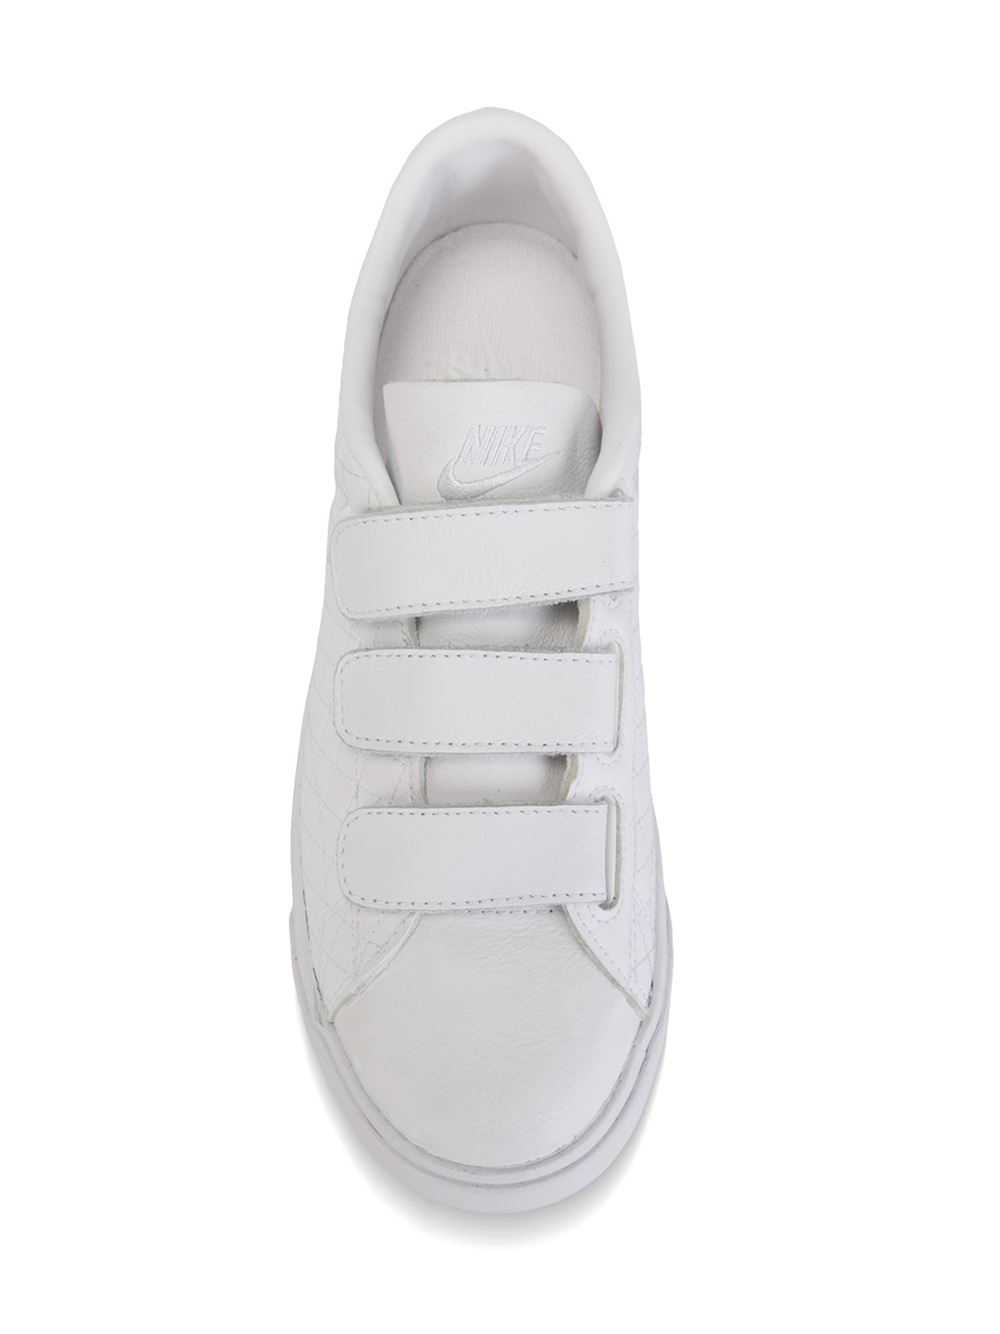 Nike Leather Tennis Classic AC V Low-Top Sneakers in White for Men - Lyst